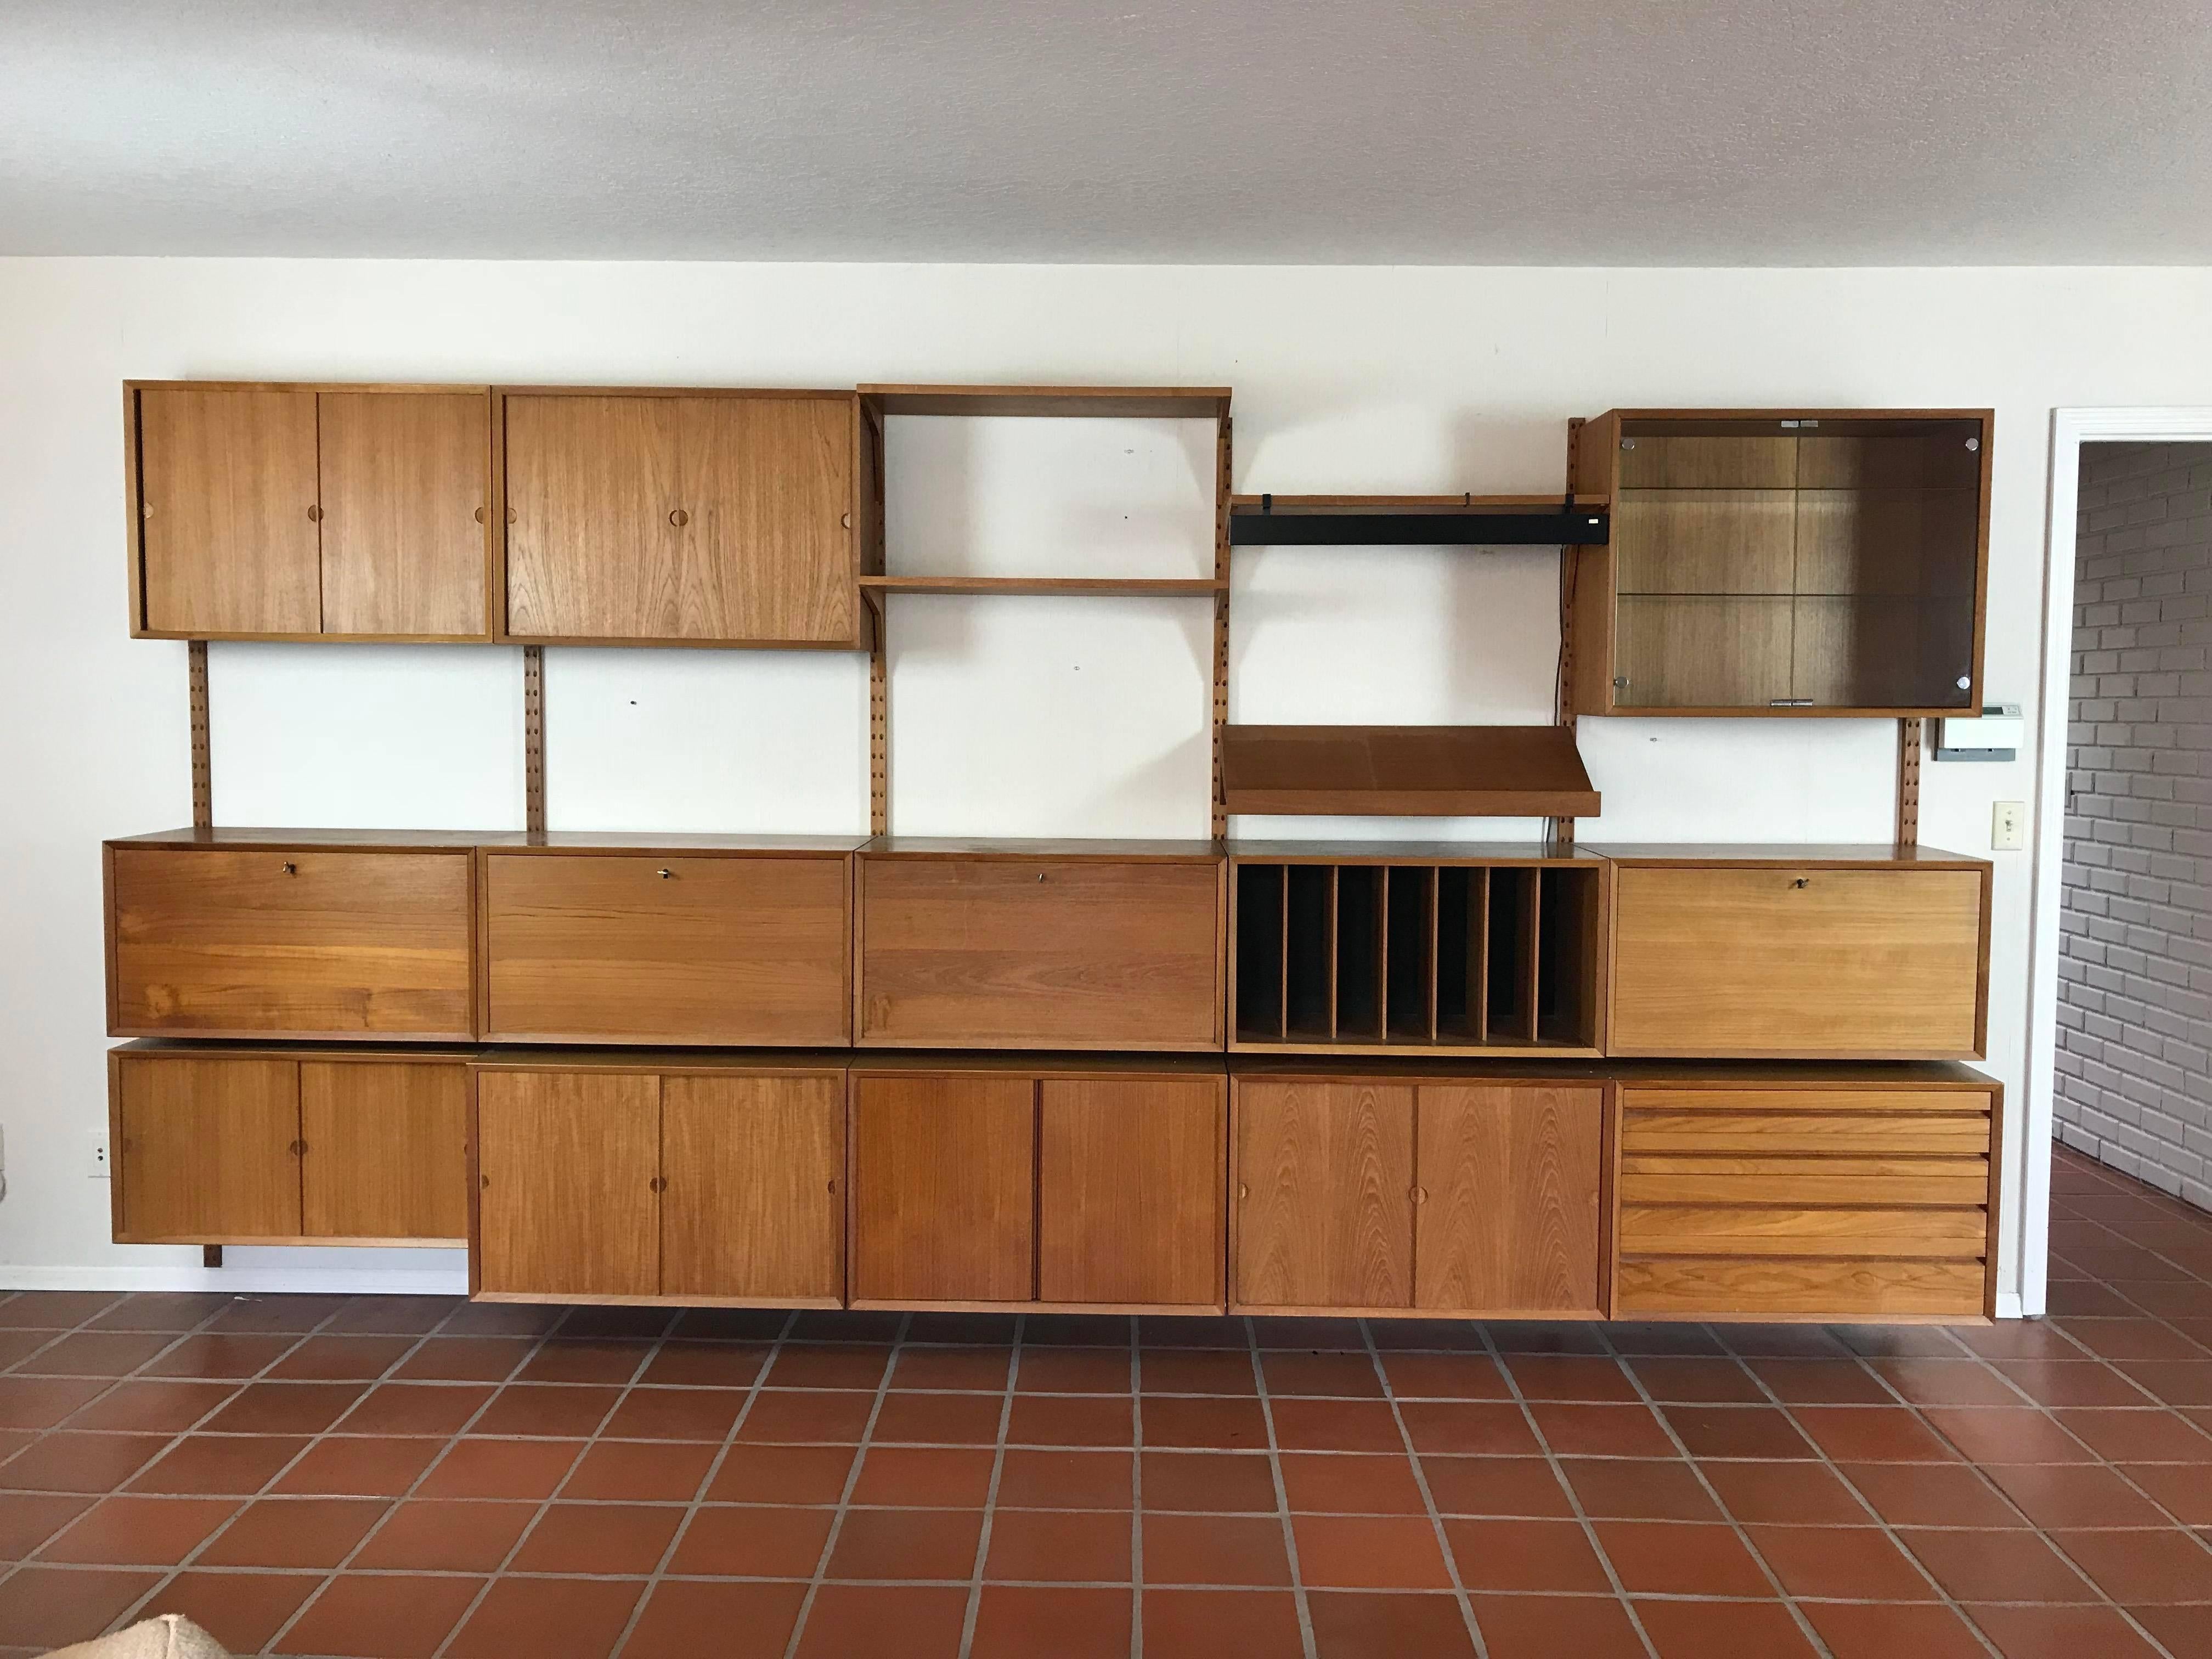 Fantastic vintage Mid-Century Modern Poul Cadovius designed Cado wall unit in teak. As shown it measures 158 inches wide, 83 inches tall and maximum depth of 19 inches. 

Included are:
Four drop front cabinets with keys,
Five cabinets with